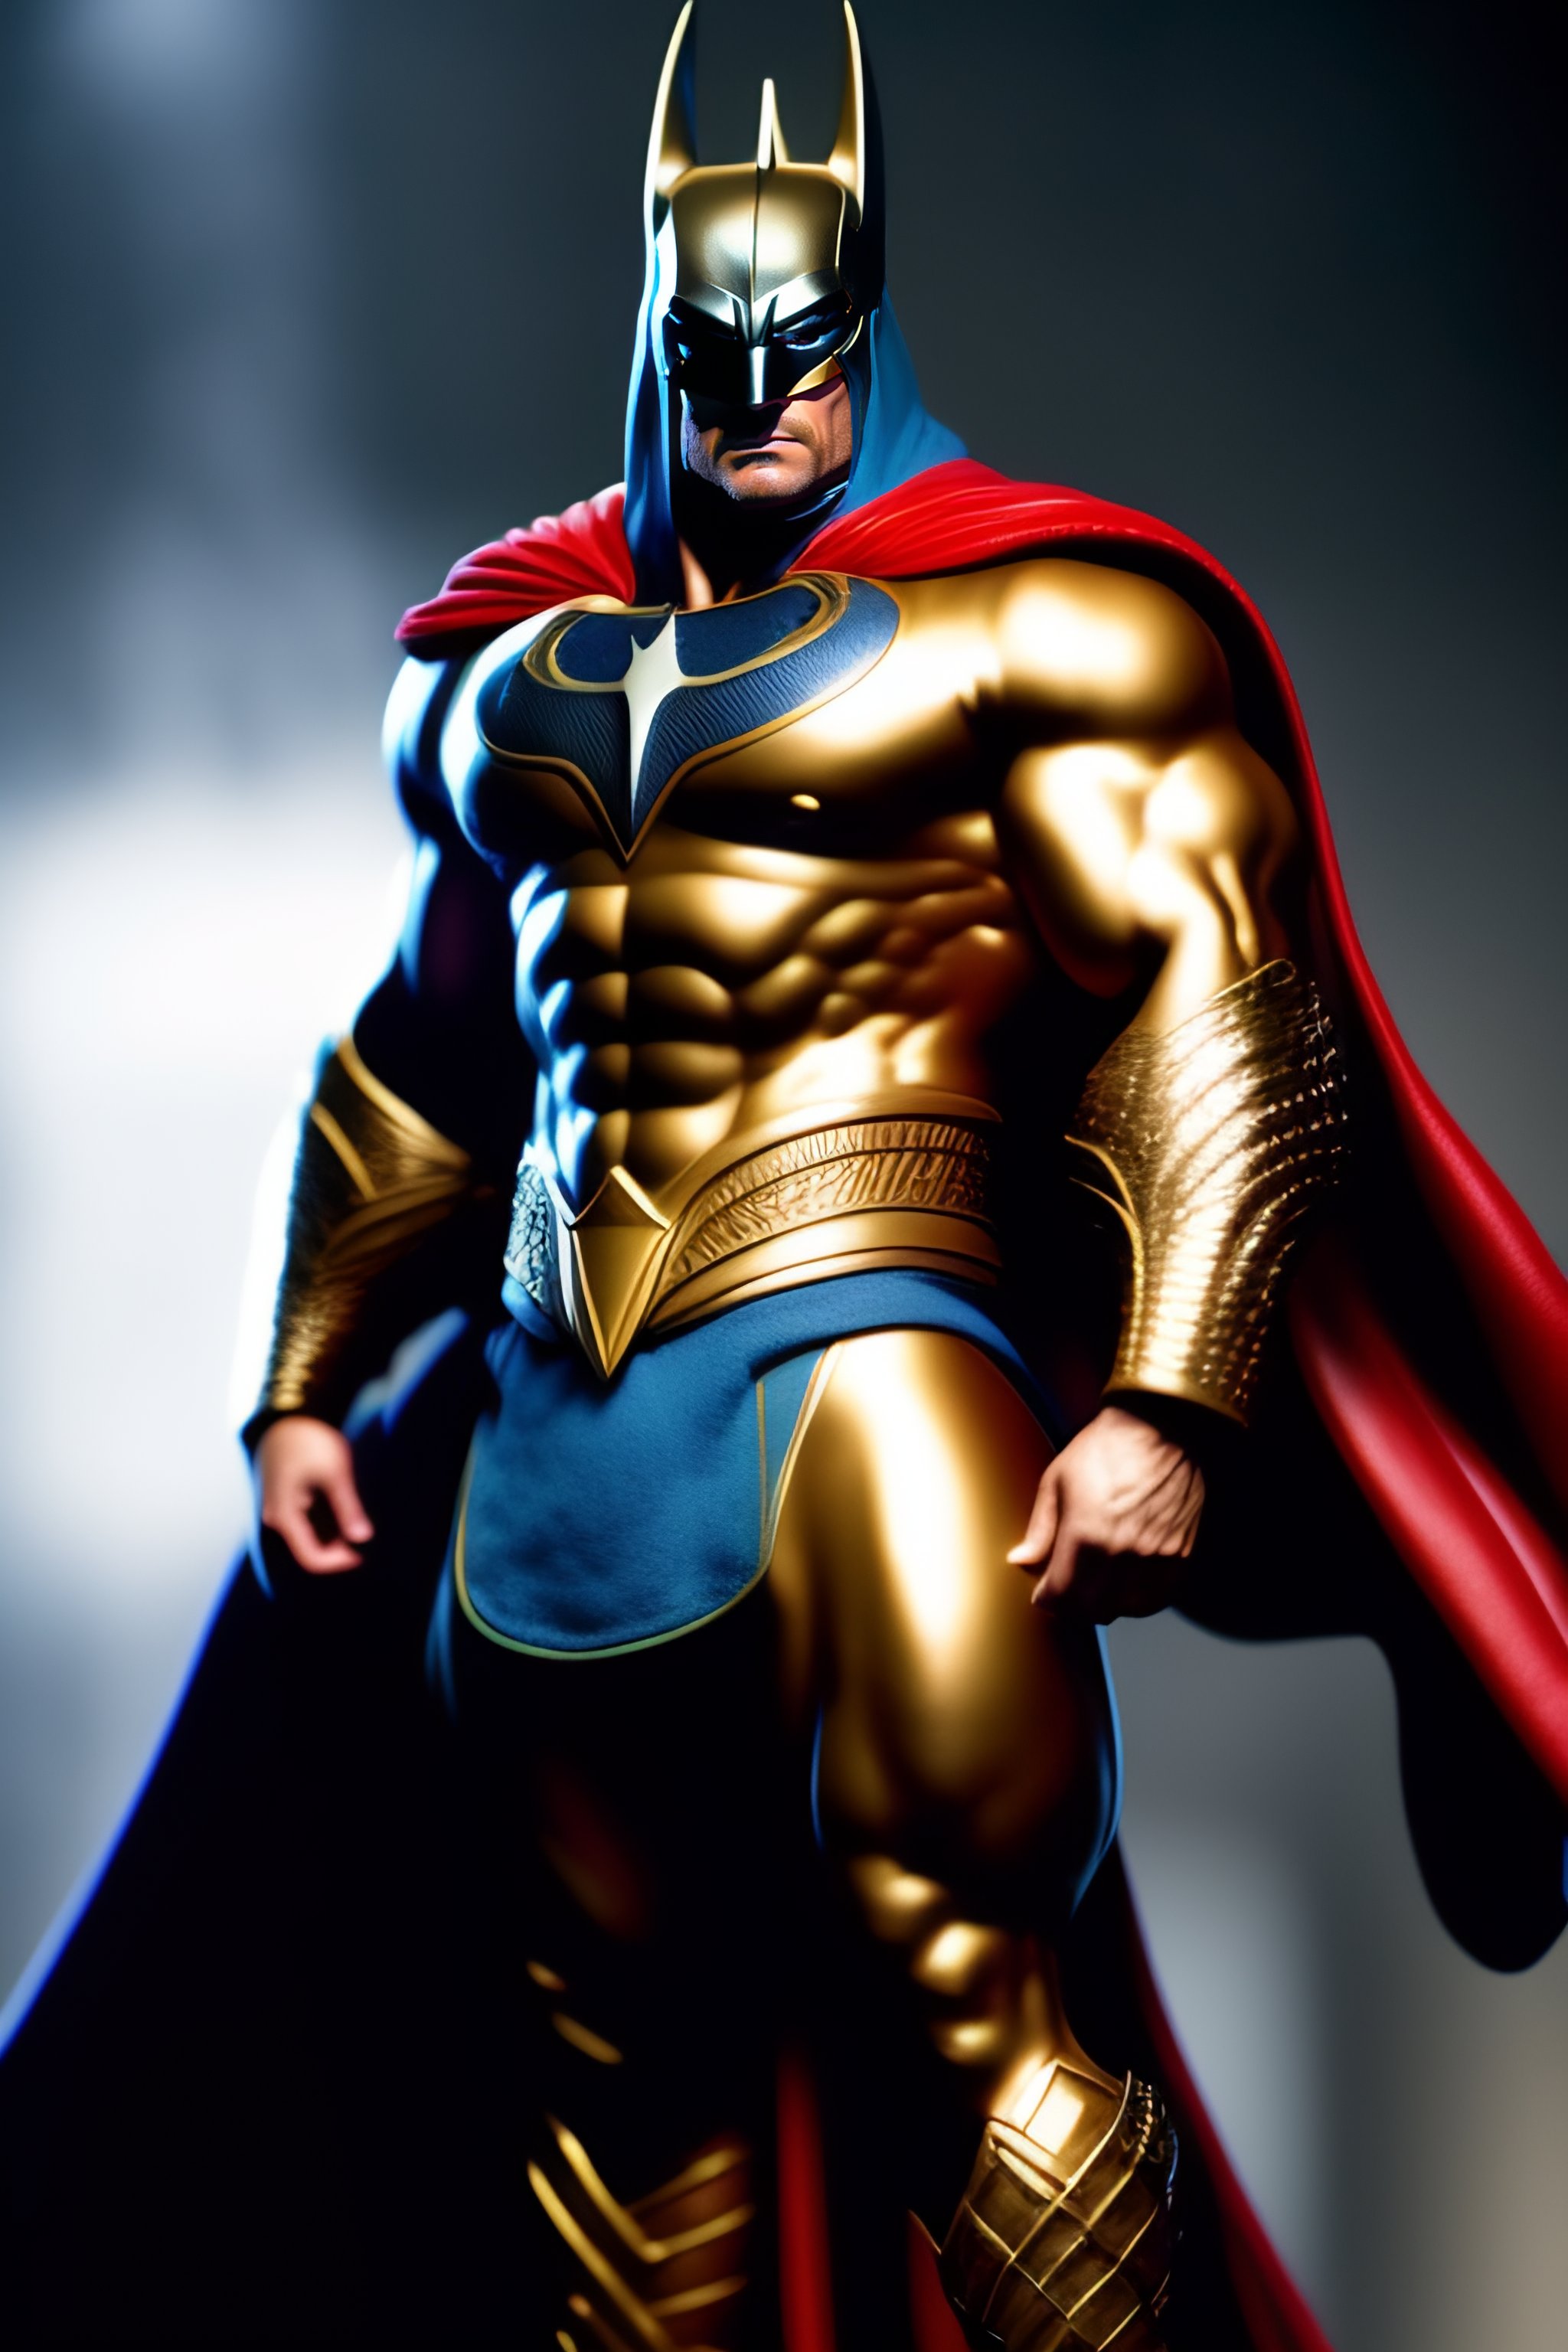 Lexica - Zeus as thor with batsuit in batman movie, full body